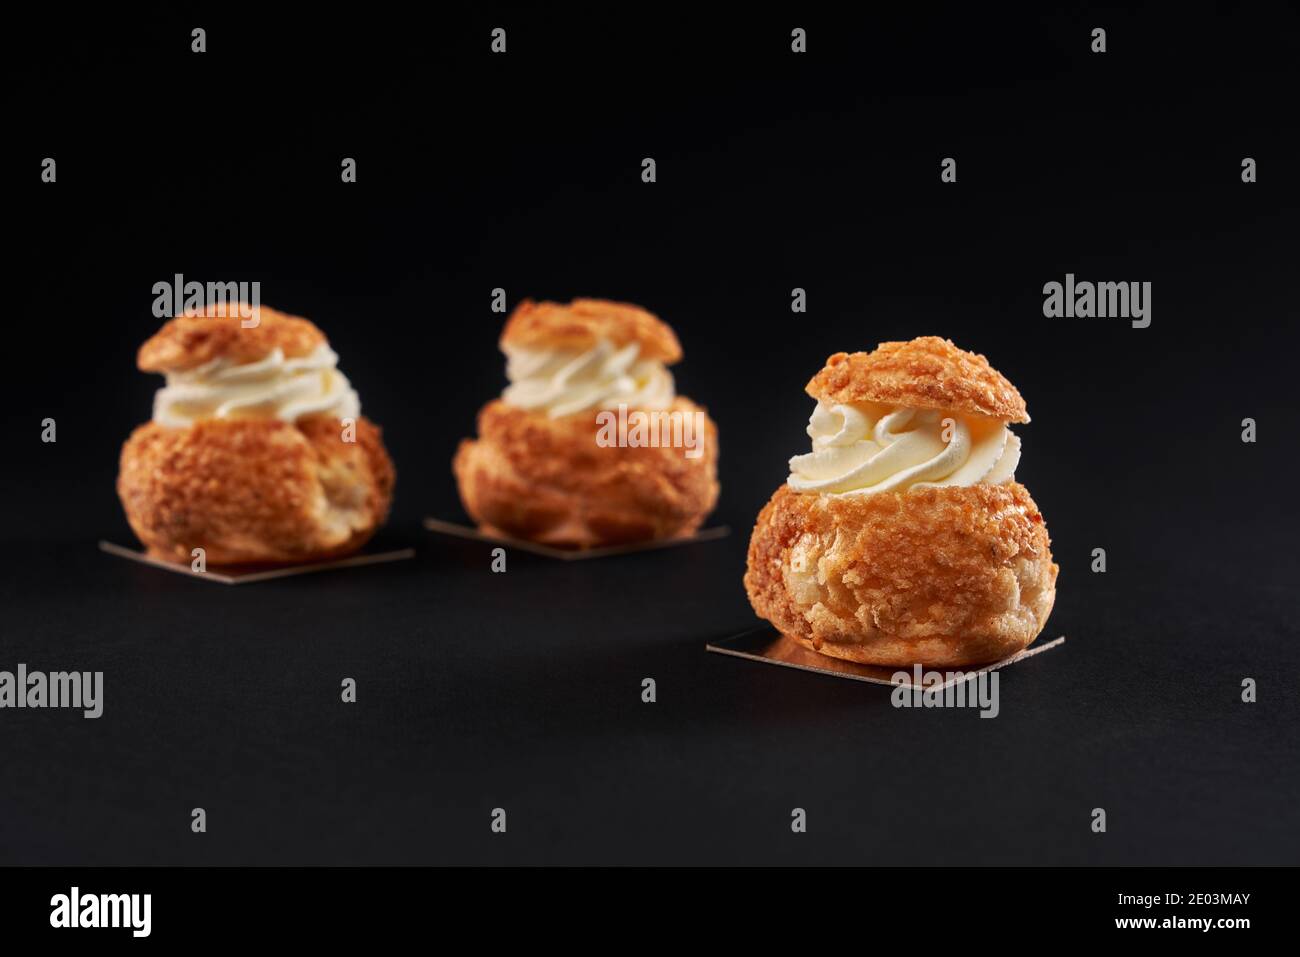 Three delicious fresh crunchy profiteroles with sweet white cream inside. Closeup of homemade tasty eclairs isolated on black background. Concept of desserts, restaurant food. Stock Photo